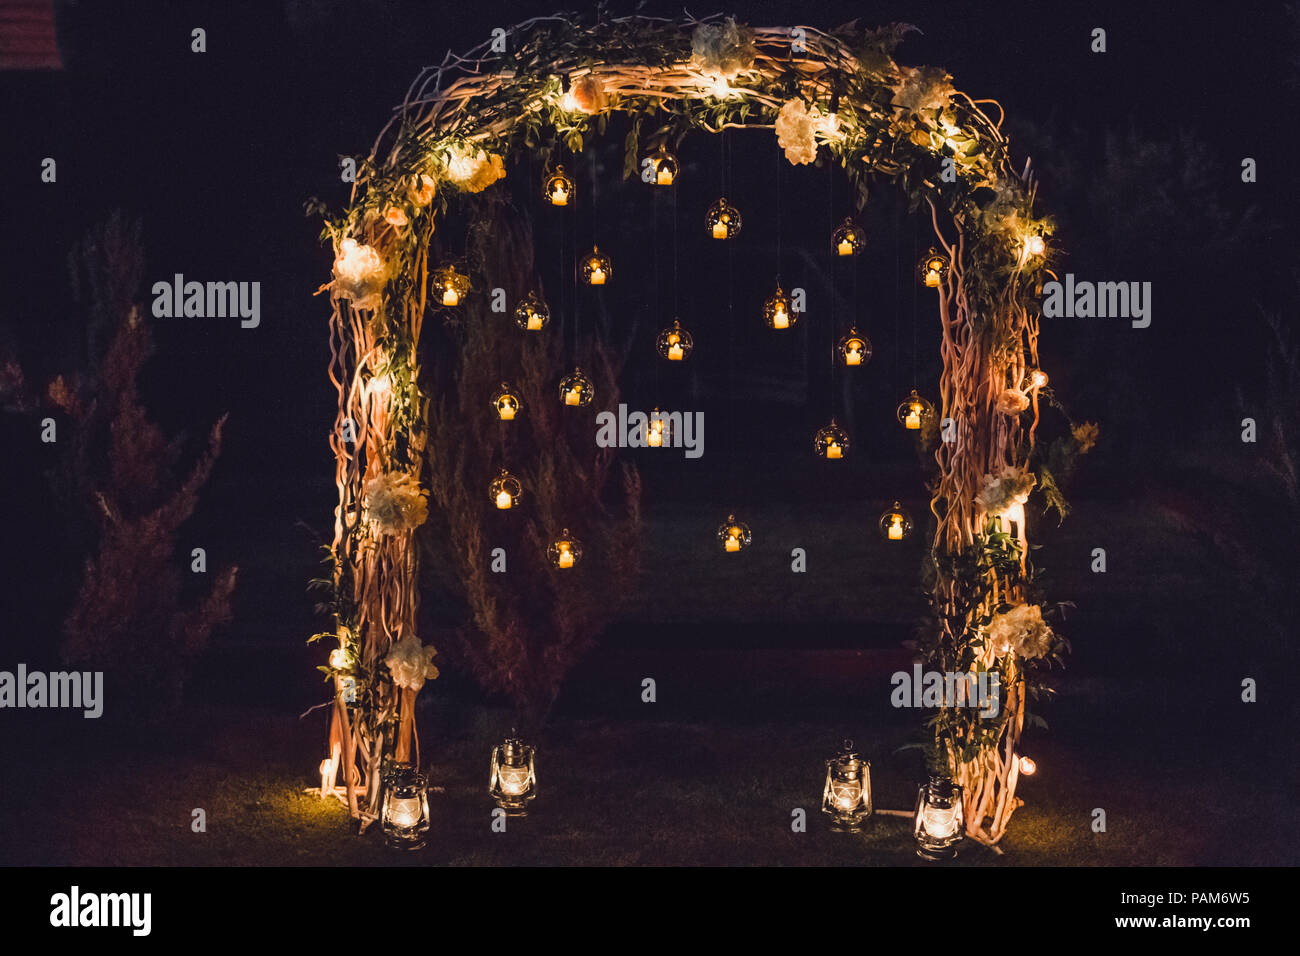 Night wedding ceremony, arch on party decorated with lights and candles in round glass spheres Stock Photo